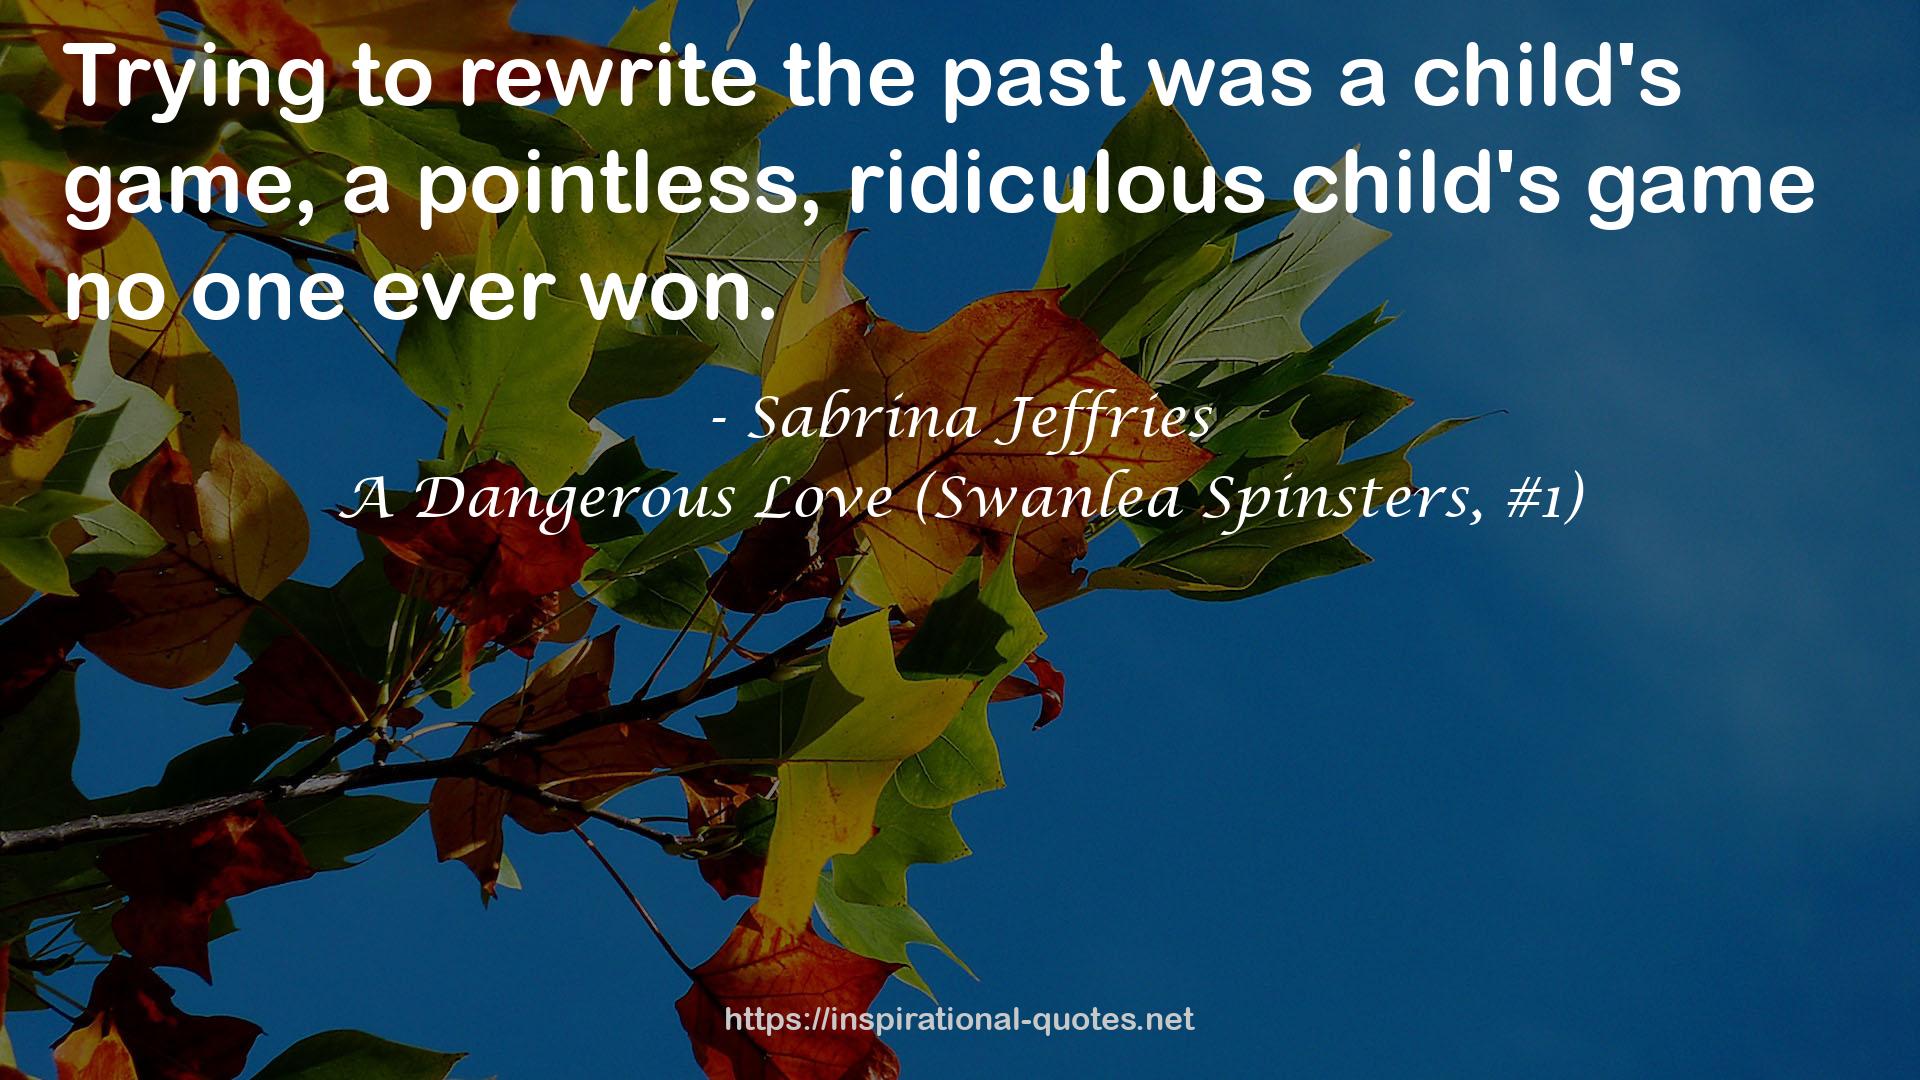 A Dangerous Love (Swanlea Spinsters, #1) QUOTES